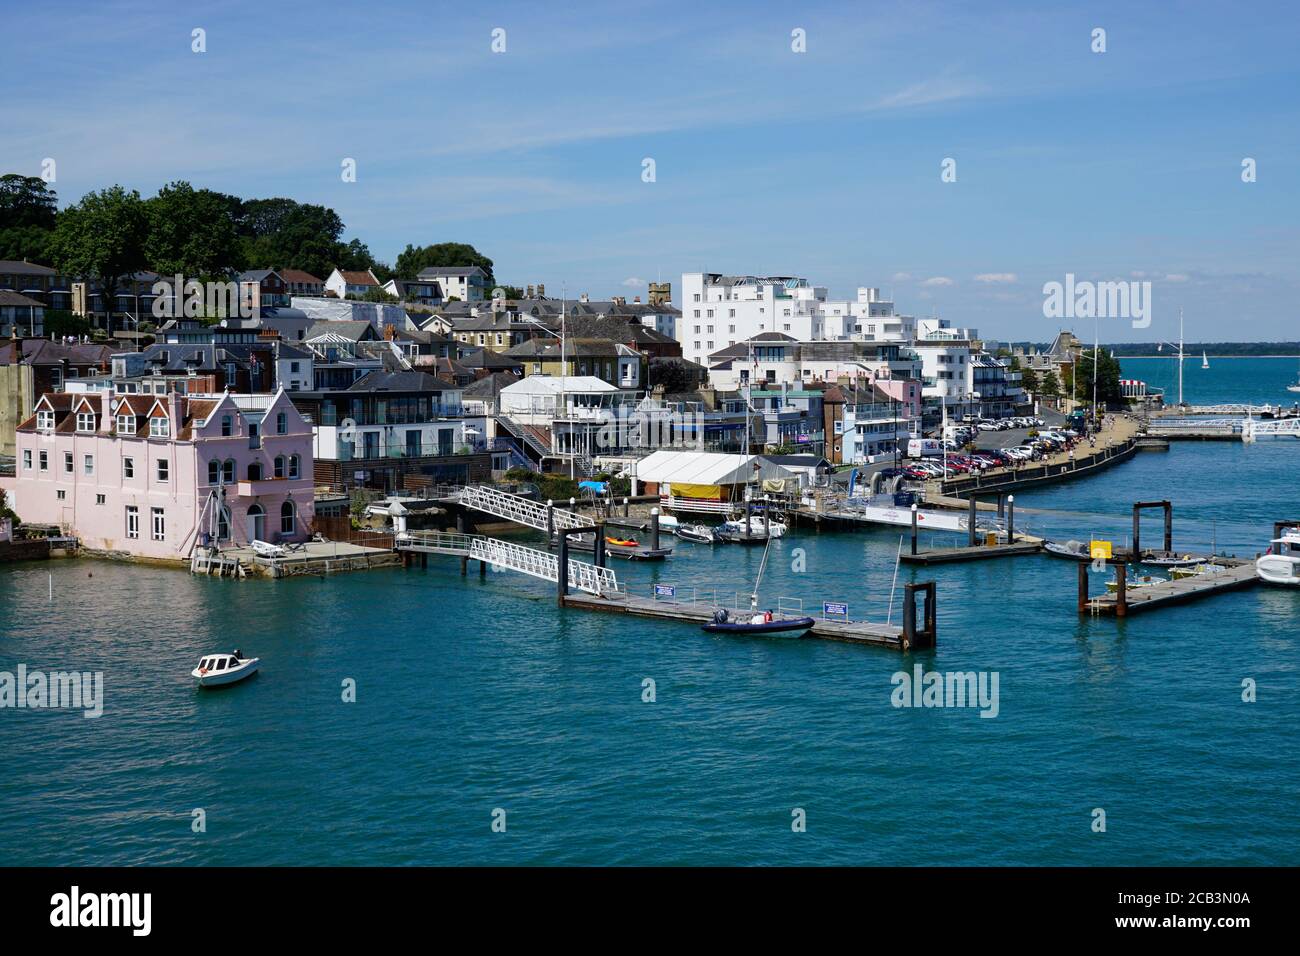 Cowes, Isle of Wight, UK.   July 22, 2020.  The sailing club and quay at the famous town of Cowes on the Isle of Wight, UK. Stock Photo